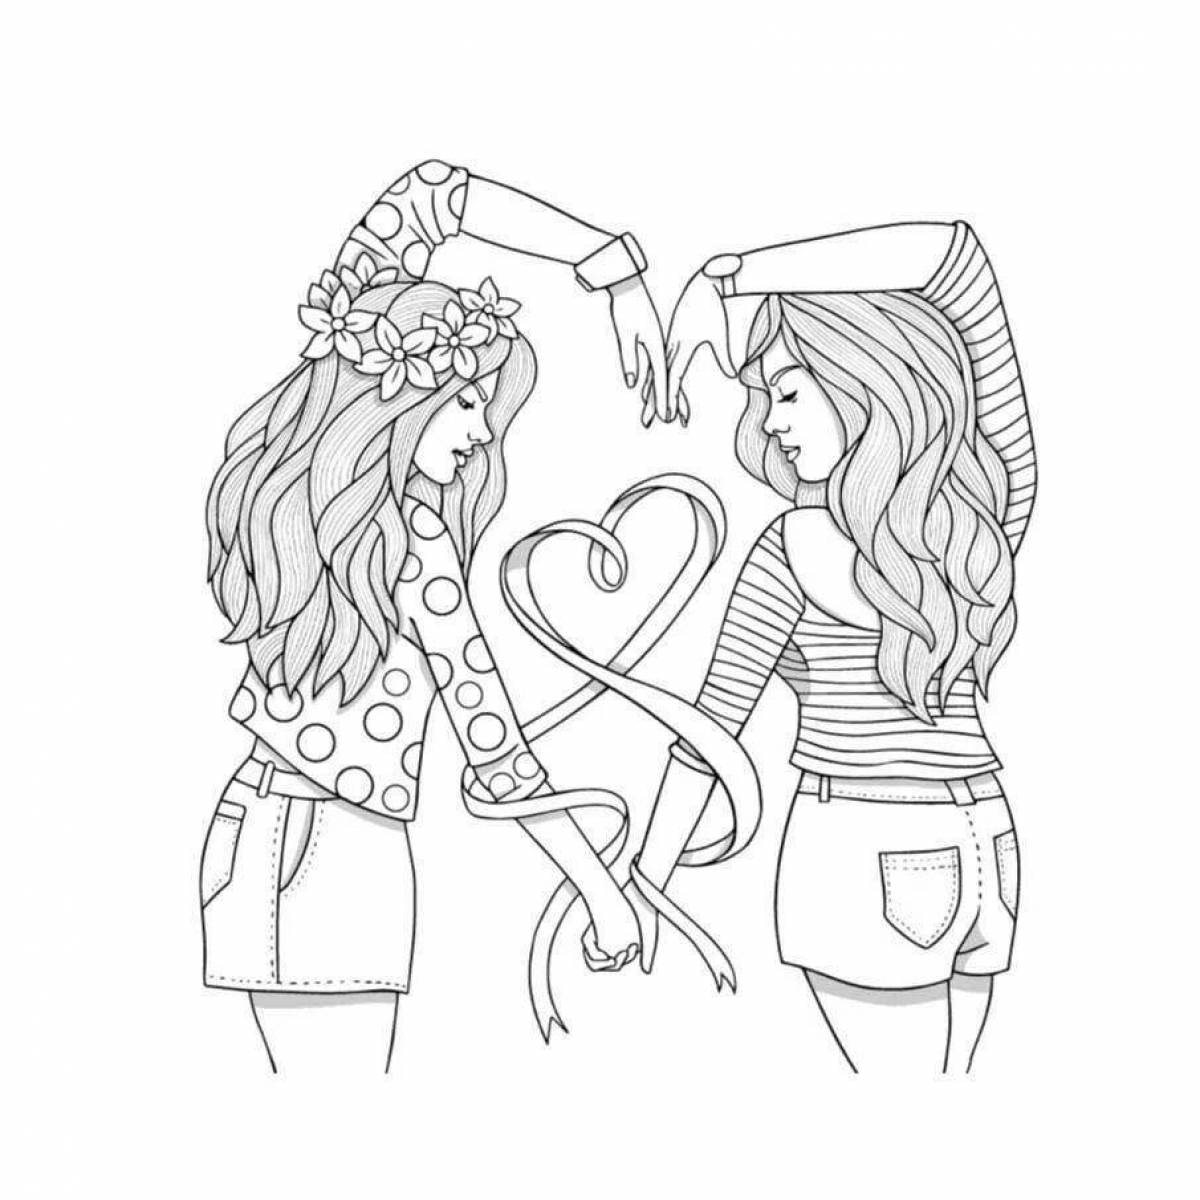 Blissful lp girls coloring page